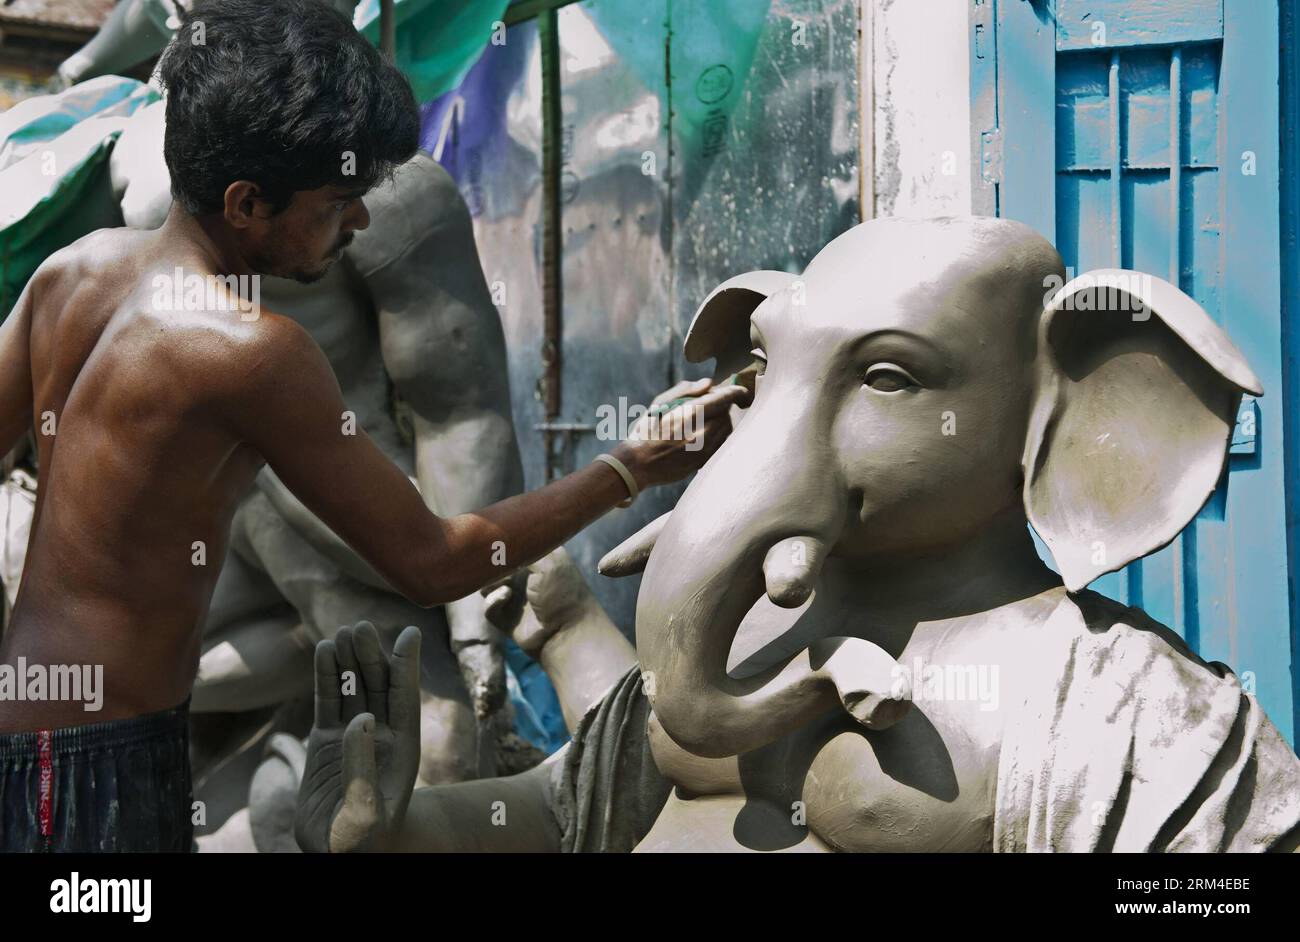 Bildnummer: 60444149  Datum: 05.09.2013  Copyright: imago/Xinhua An Indian artist works on an idol of elephant-headed Hindu God Ganesha ahead of Ganesh Chaturthi festival at a workshop in Calcutta, India, Sept. 5, 2013. Ganesh Chaturthi festival, which begins from Sept. 9, is celebrated as the birthday of Lord Ganesha who is widely worshiped by Hindus as the god of wisdom, prosperity and good fortune. (Xinhua/Tumpa Mondal)(zcc) INDIA-CALCUTTA-GANESHA CHATURTHI FESTIVAL-PREPARATION PUBLICATIONxNOTxINxCHN xns x0x 2013 quer     60444149 Date 05 09 2013 Copyright Imago XINHUA to Indian Artist Work Stock Photo